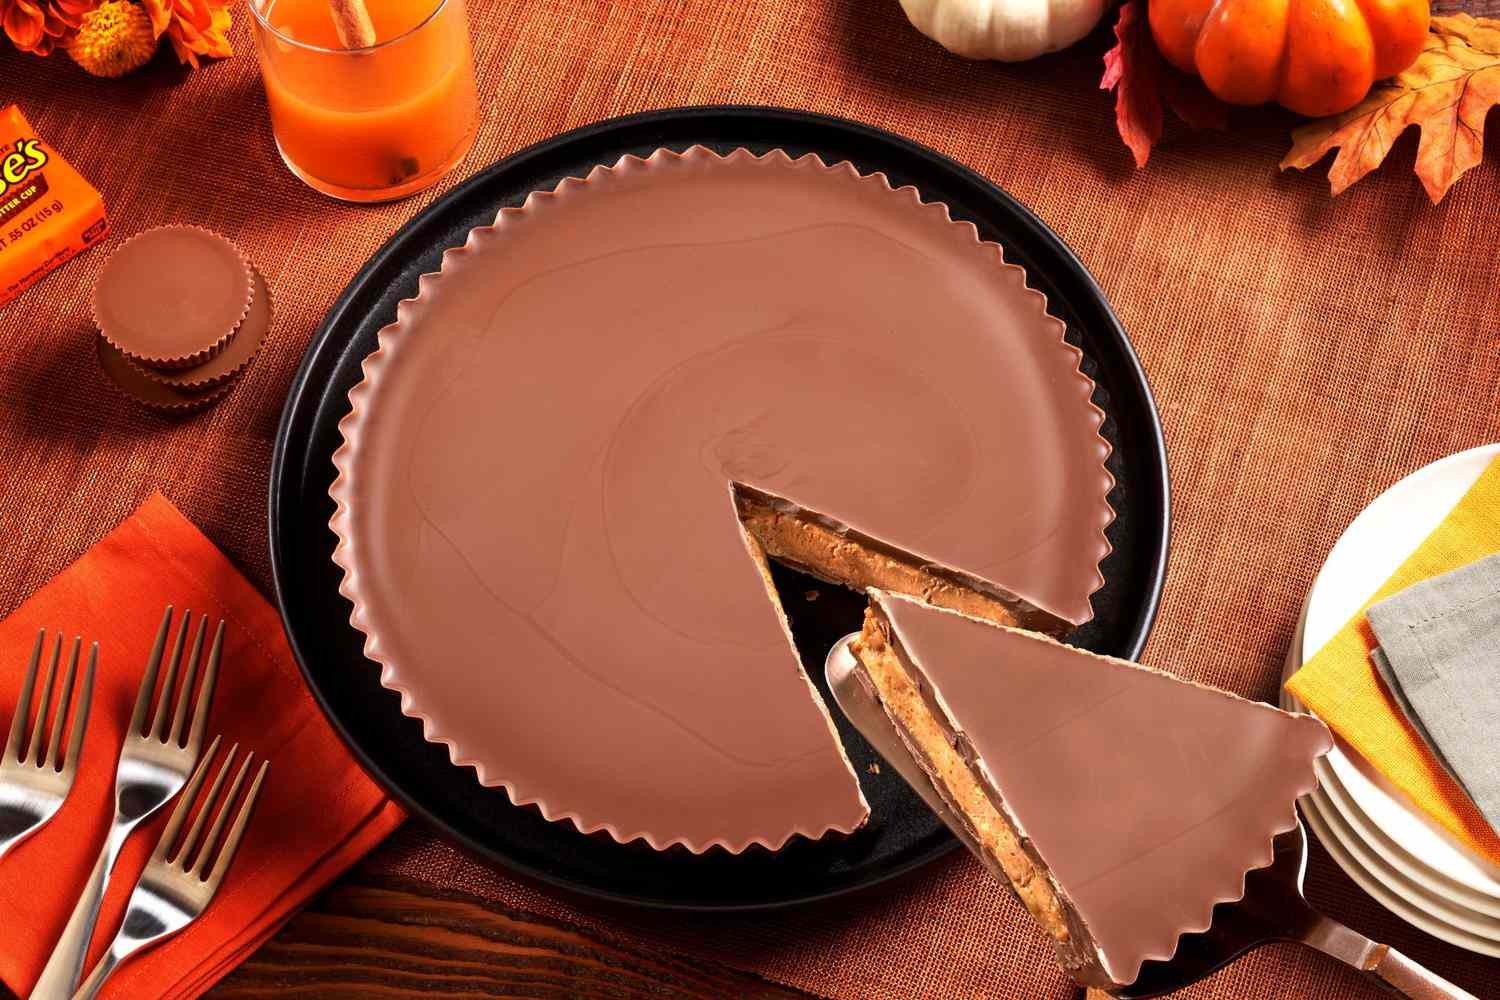 a reese's pie with a wedge cut sits on a table with candles and pumpkins